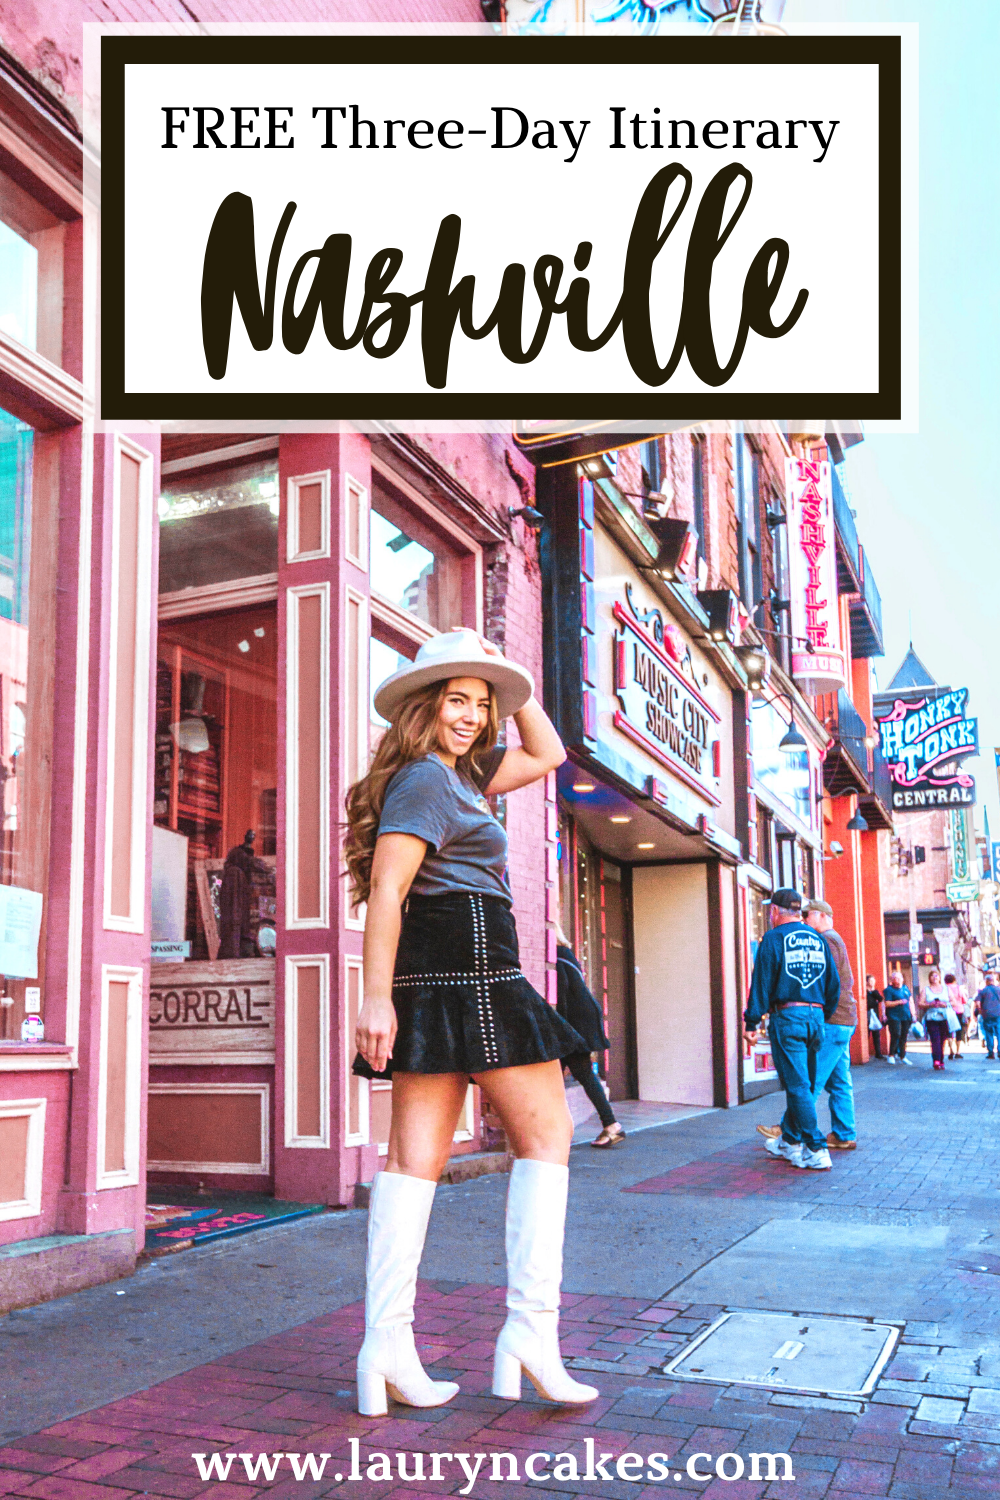 image of woman walking down Broadway with the text "free 3-day itinerary Nashville" and "www.lauryncakes.com" written on the images